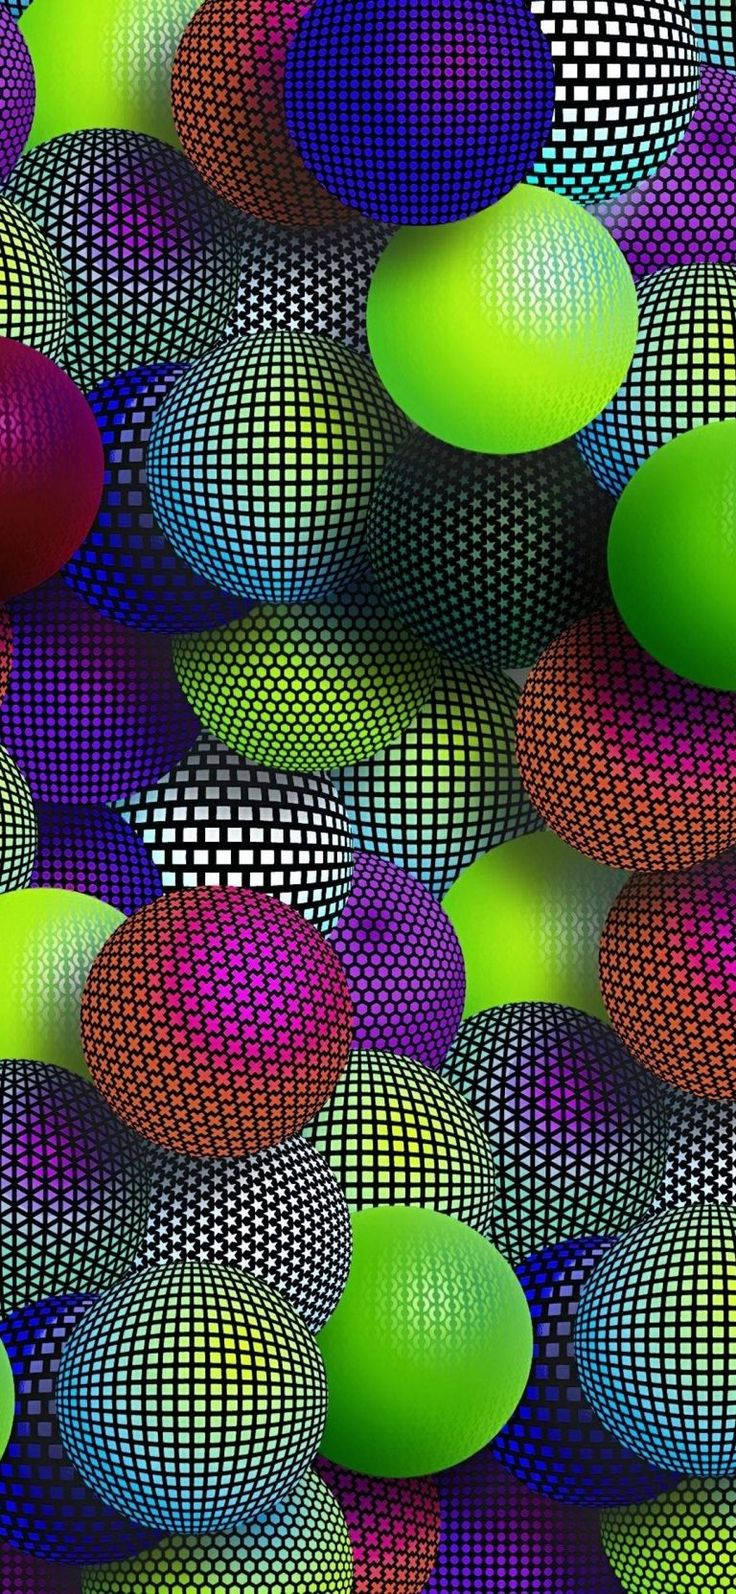 3d Phone Stacked Colorful Patterned Balls Wallpaper